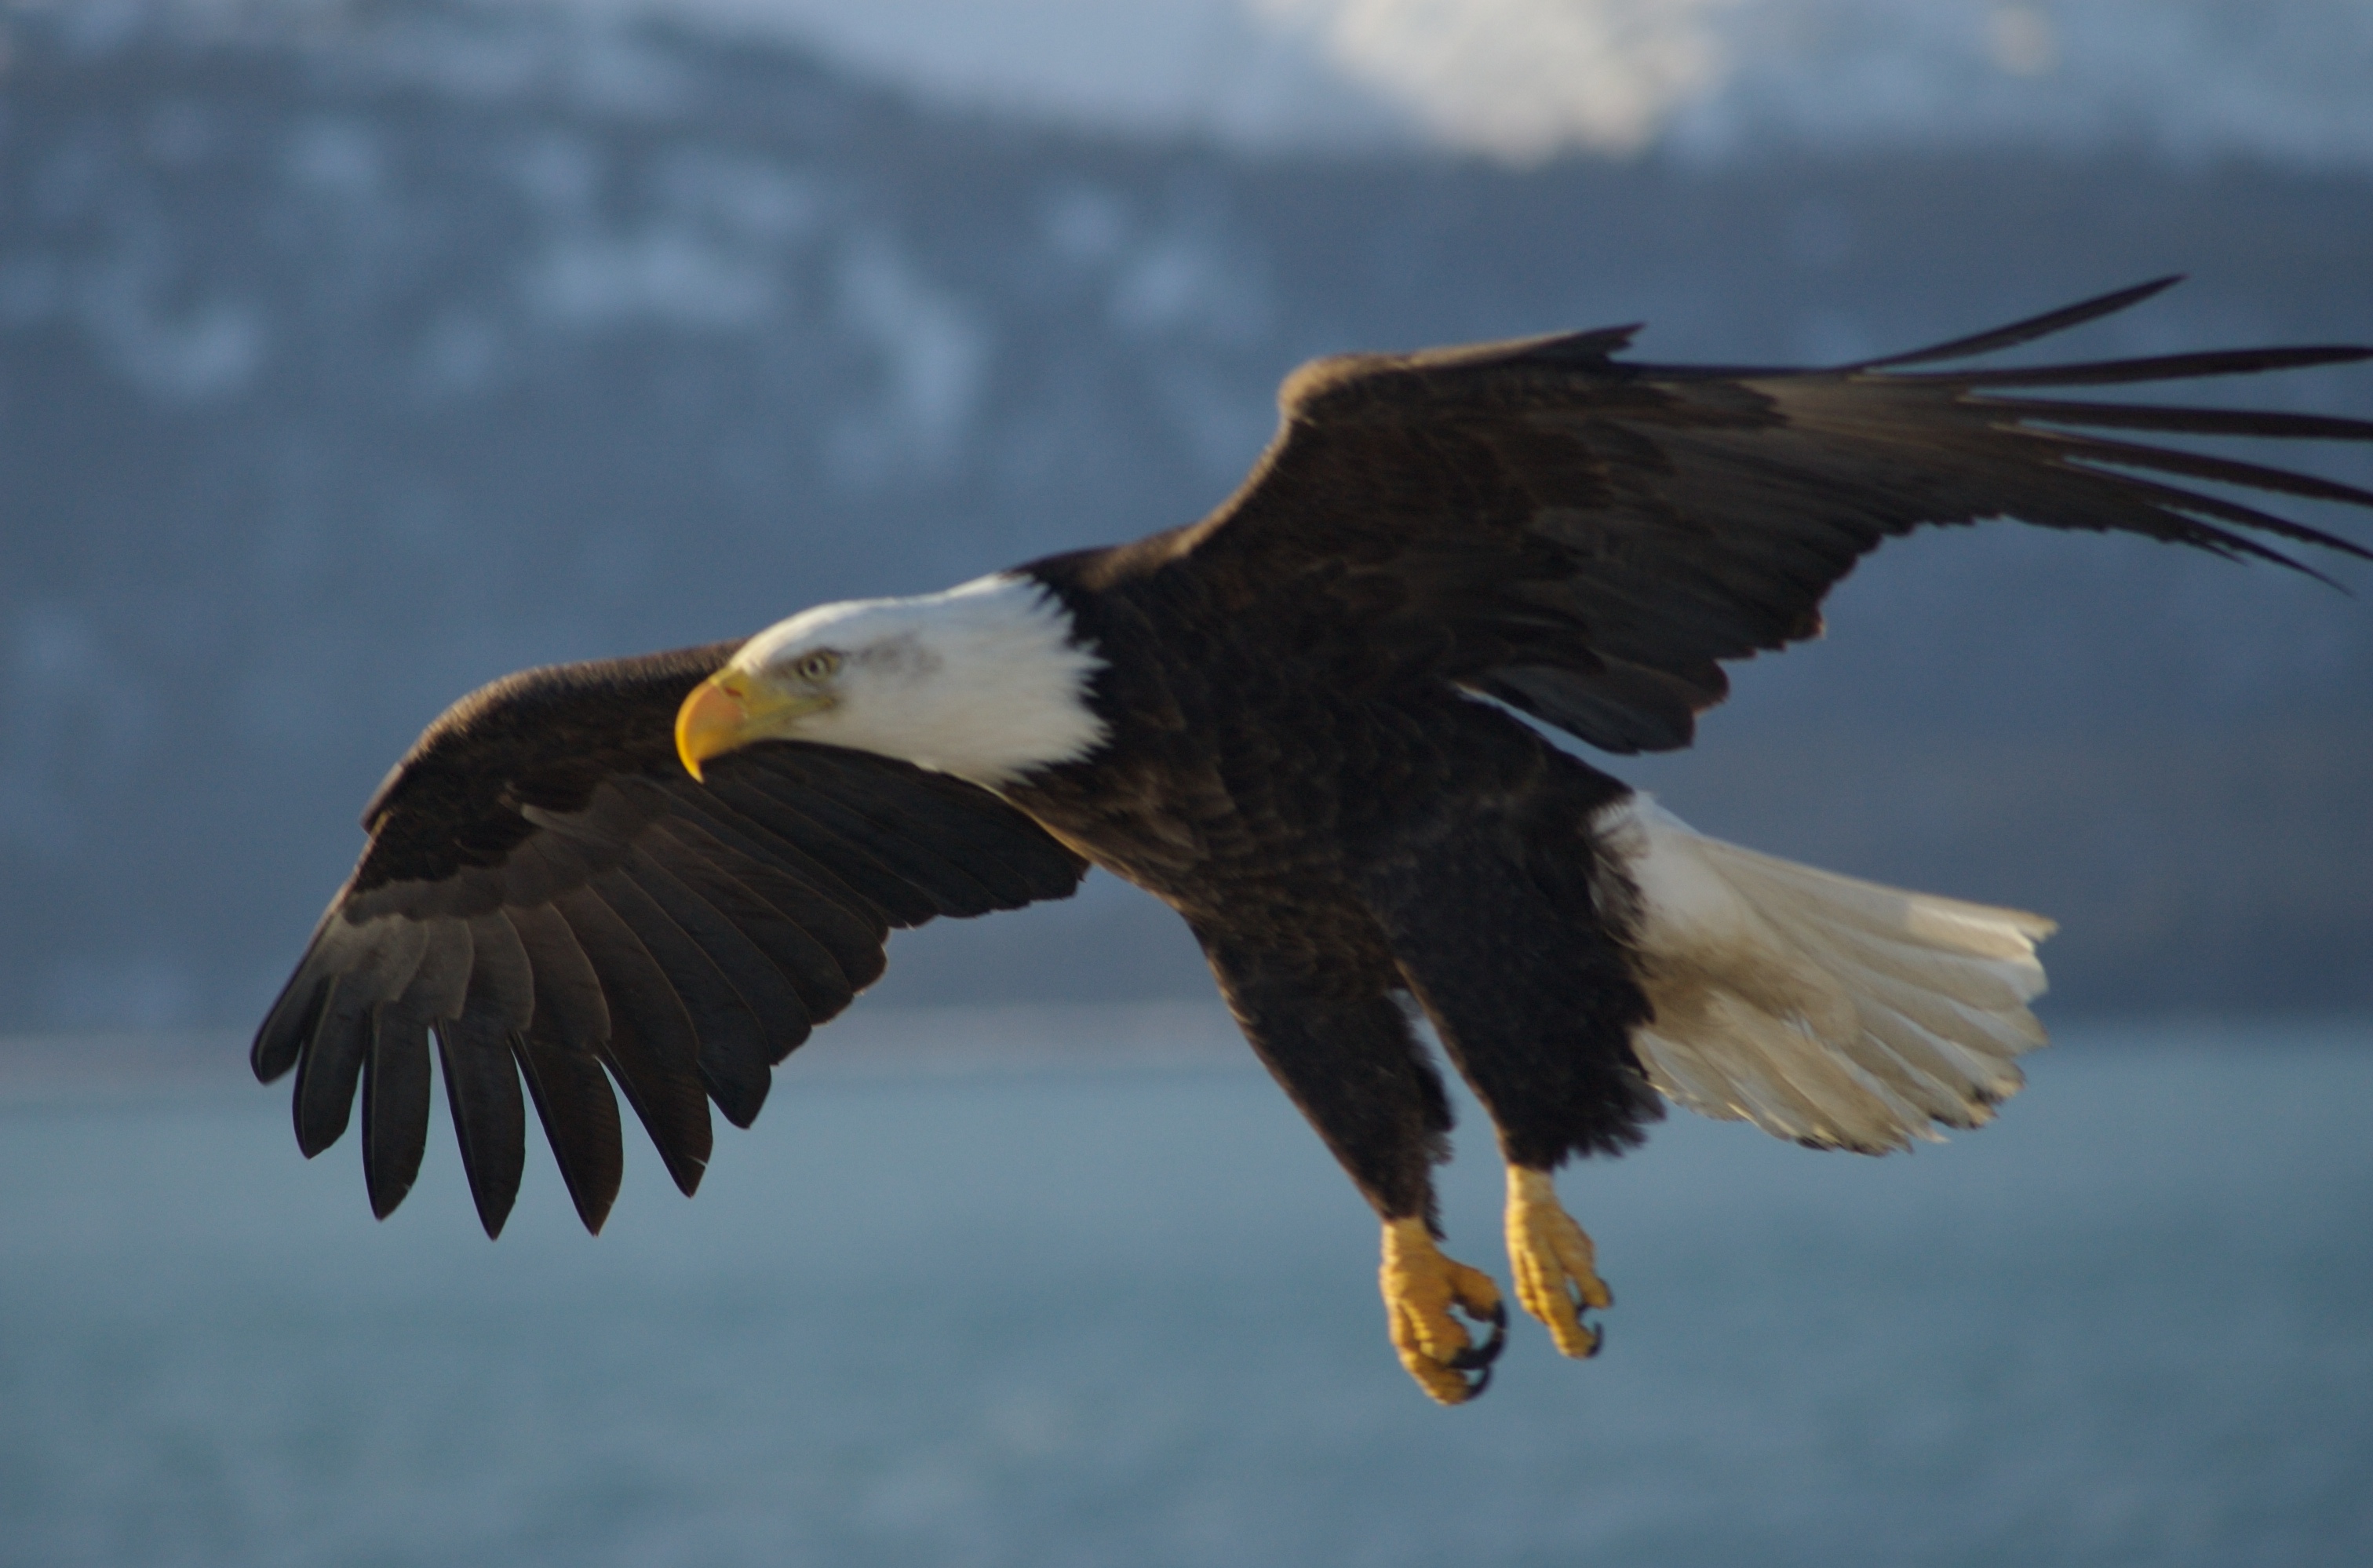 The Eagle: A mascot, or a lifestyle? | The Vedette